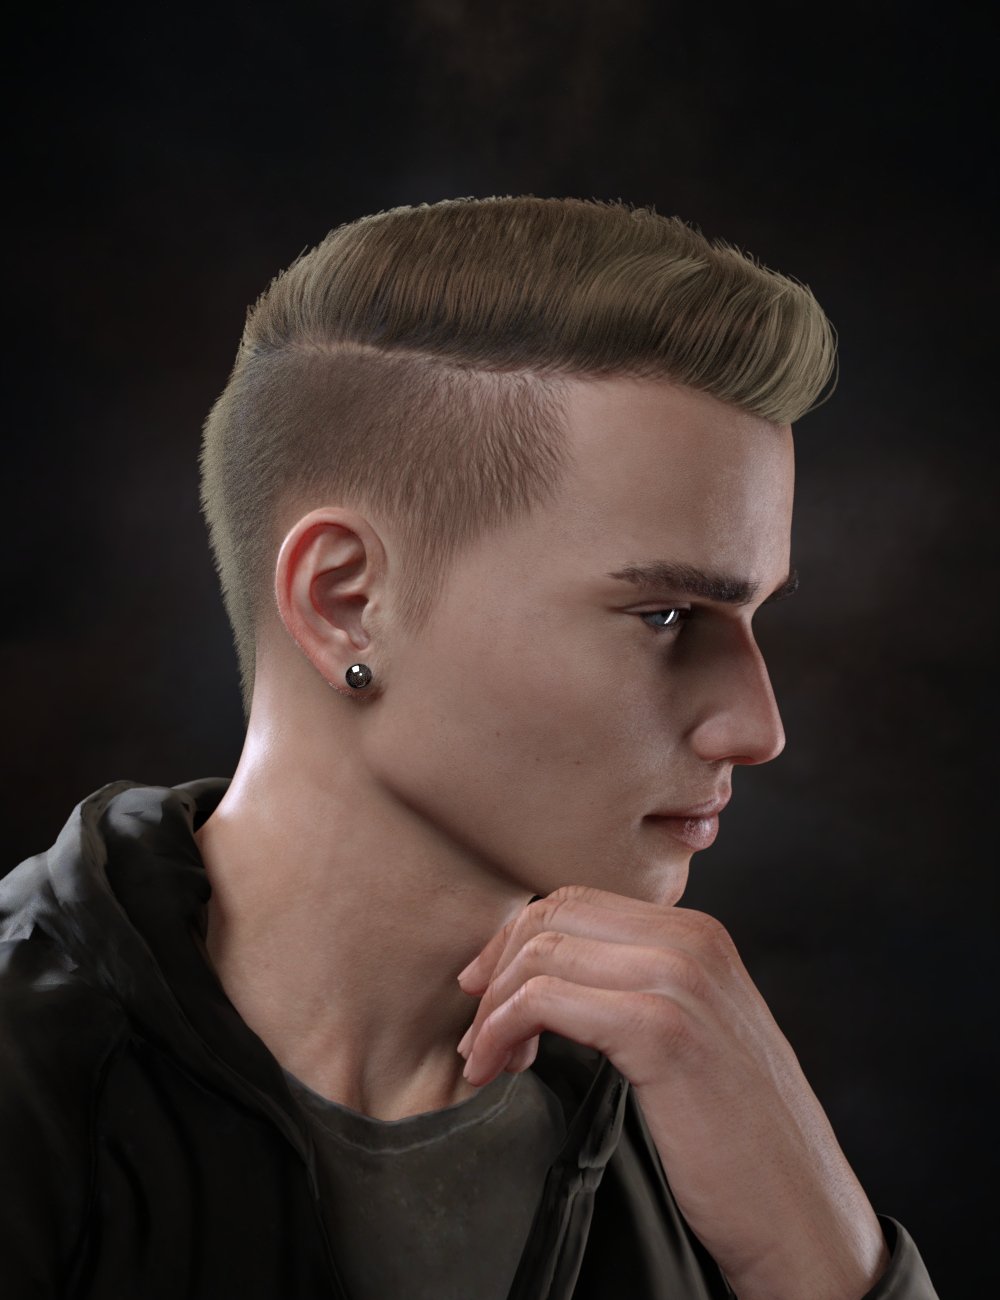 Aron Short Hair for Genesis 8 and 8.1 Males